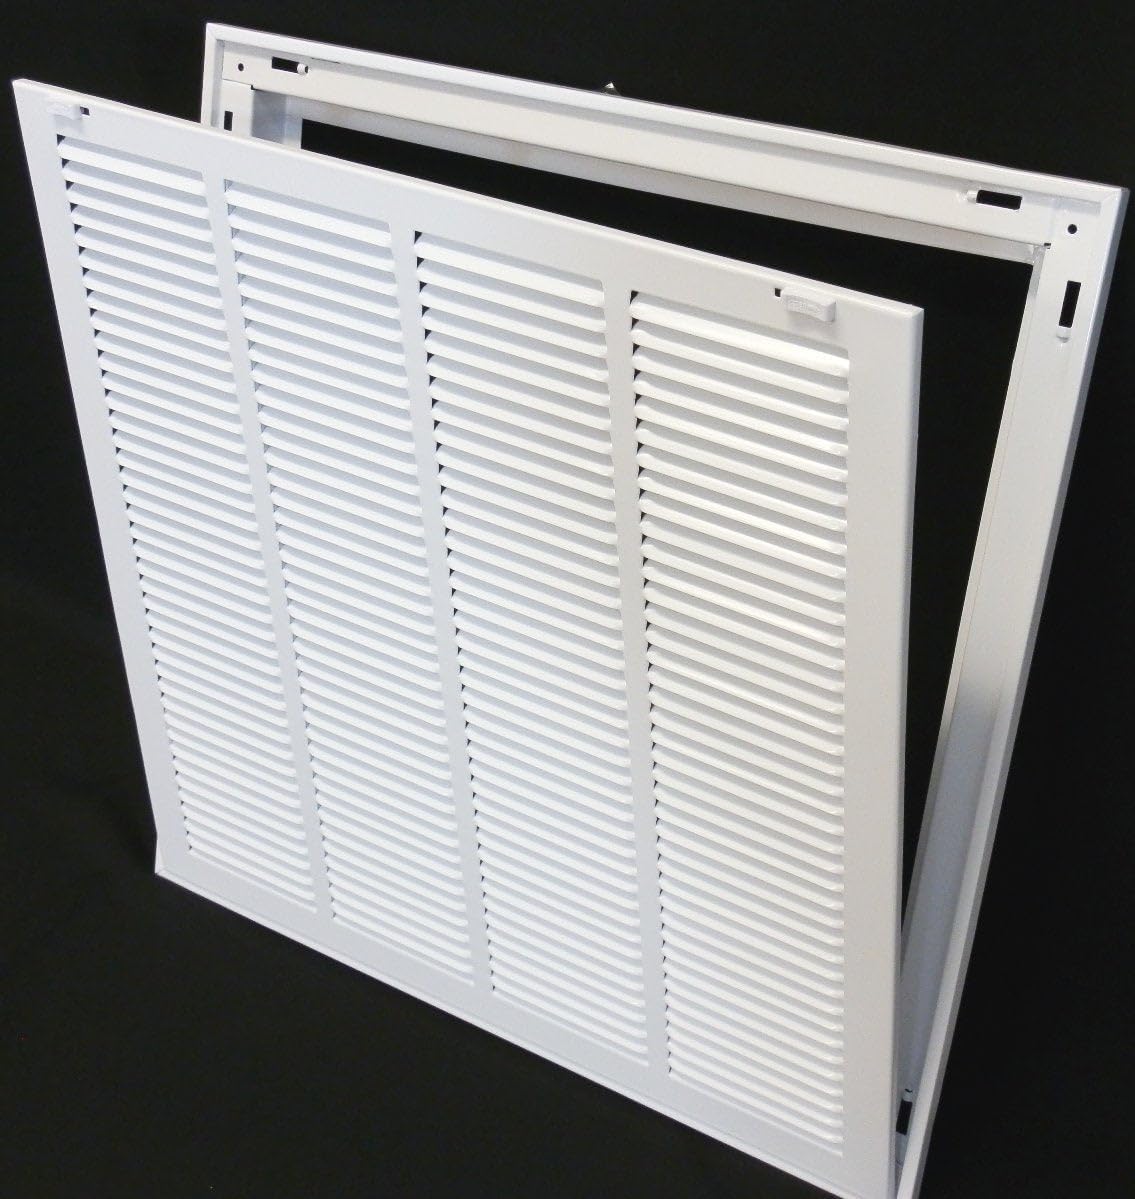 14&quot; X 20&quot; Steel Return Air Filter Grille for 1&quot; Filter - Removable Frame - * Filter Included *[Outer Dimensions: 16 5/8&quot; X 22 5/8&quot;]